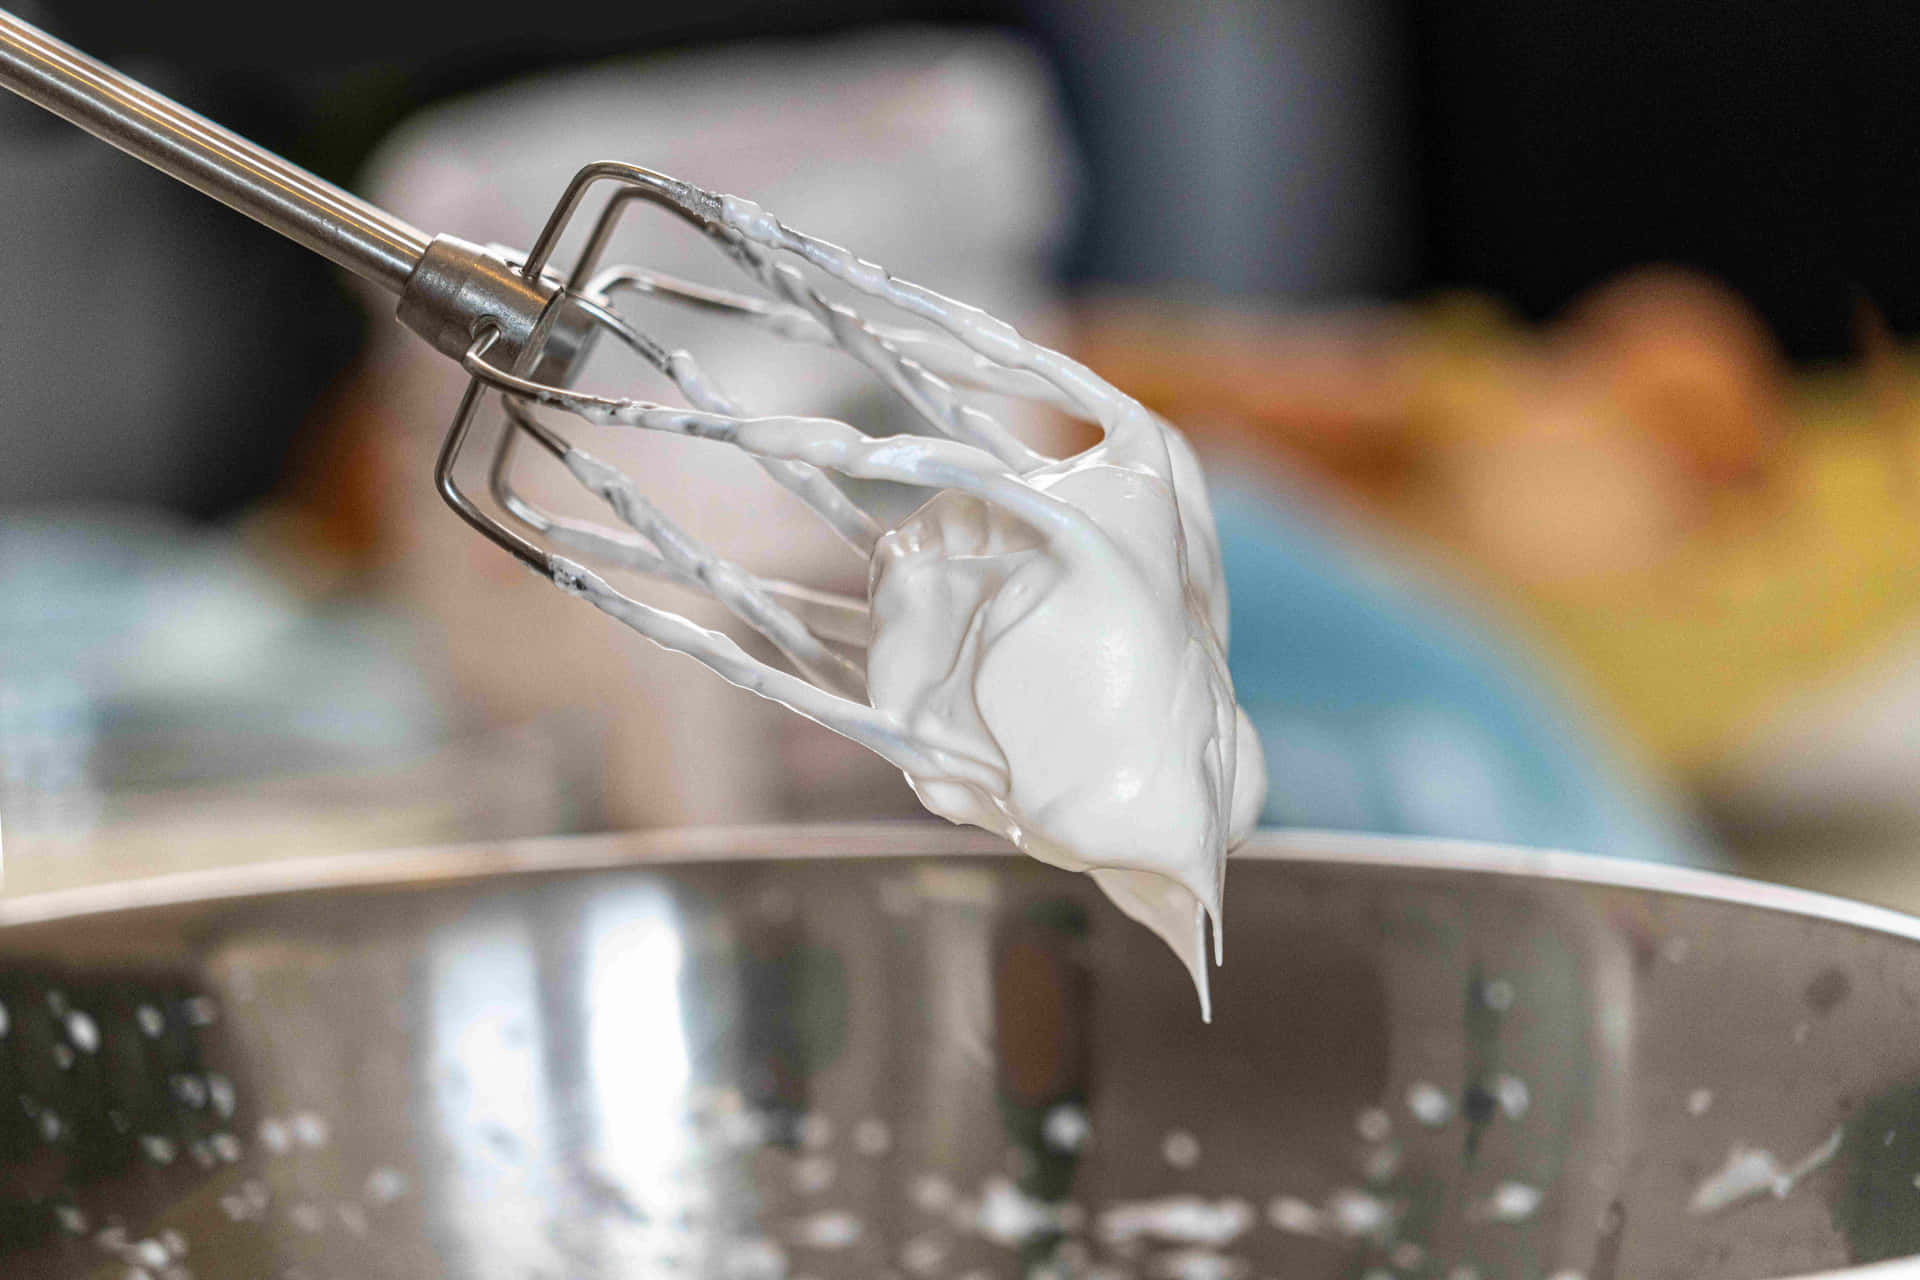 A Whisk Is Being Used To Mix A White Liquid